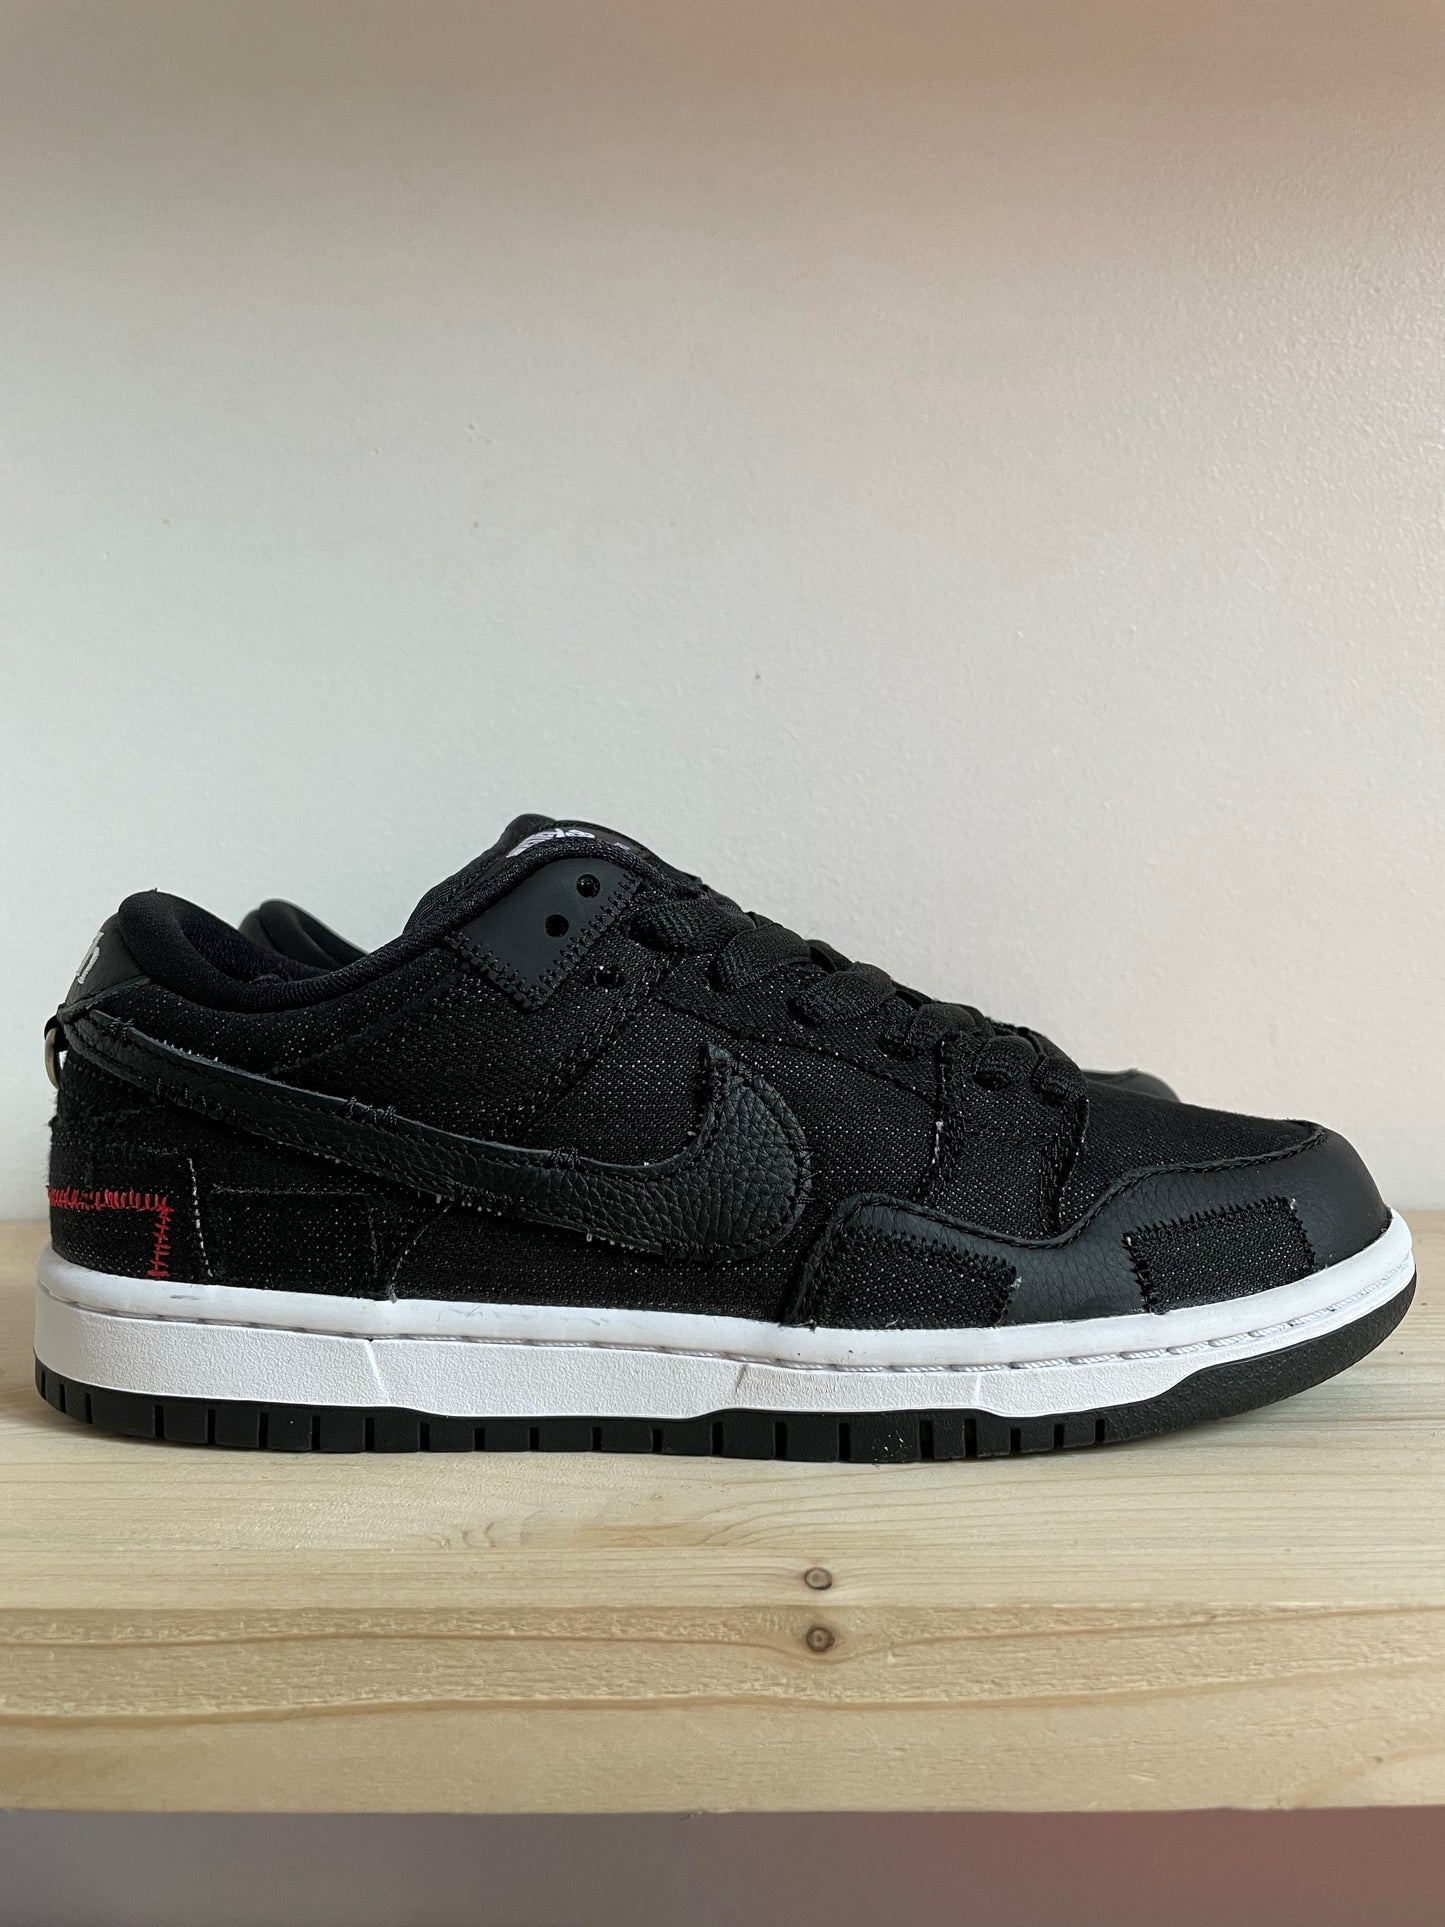 ANTWERP SNKR - Nike SB Dunk Low Pro "Wasted Youth"